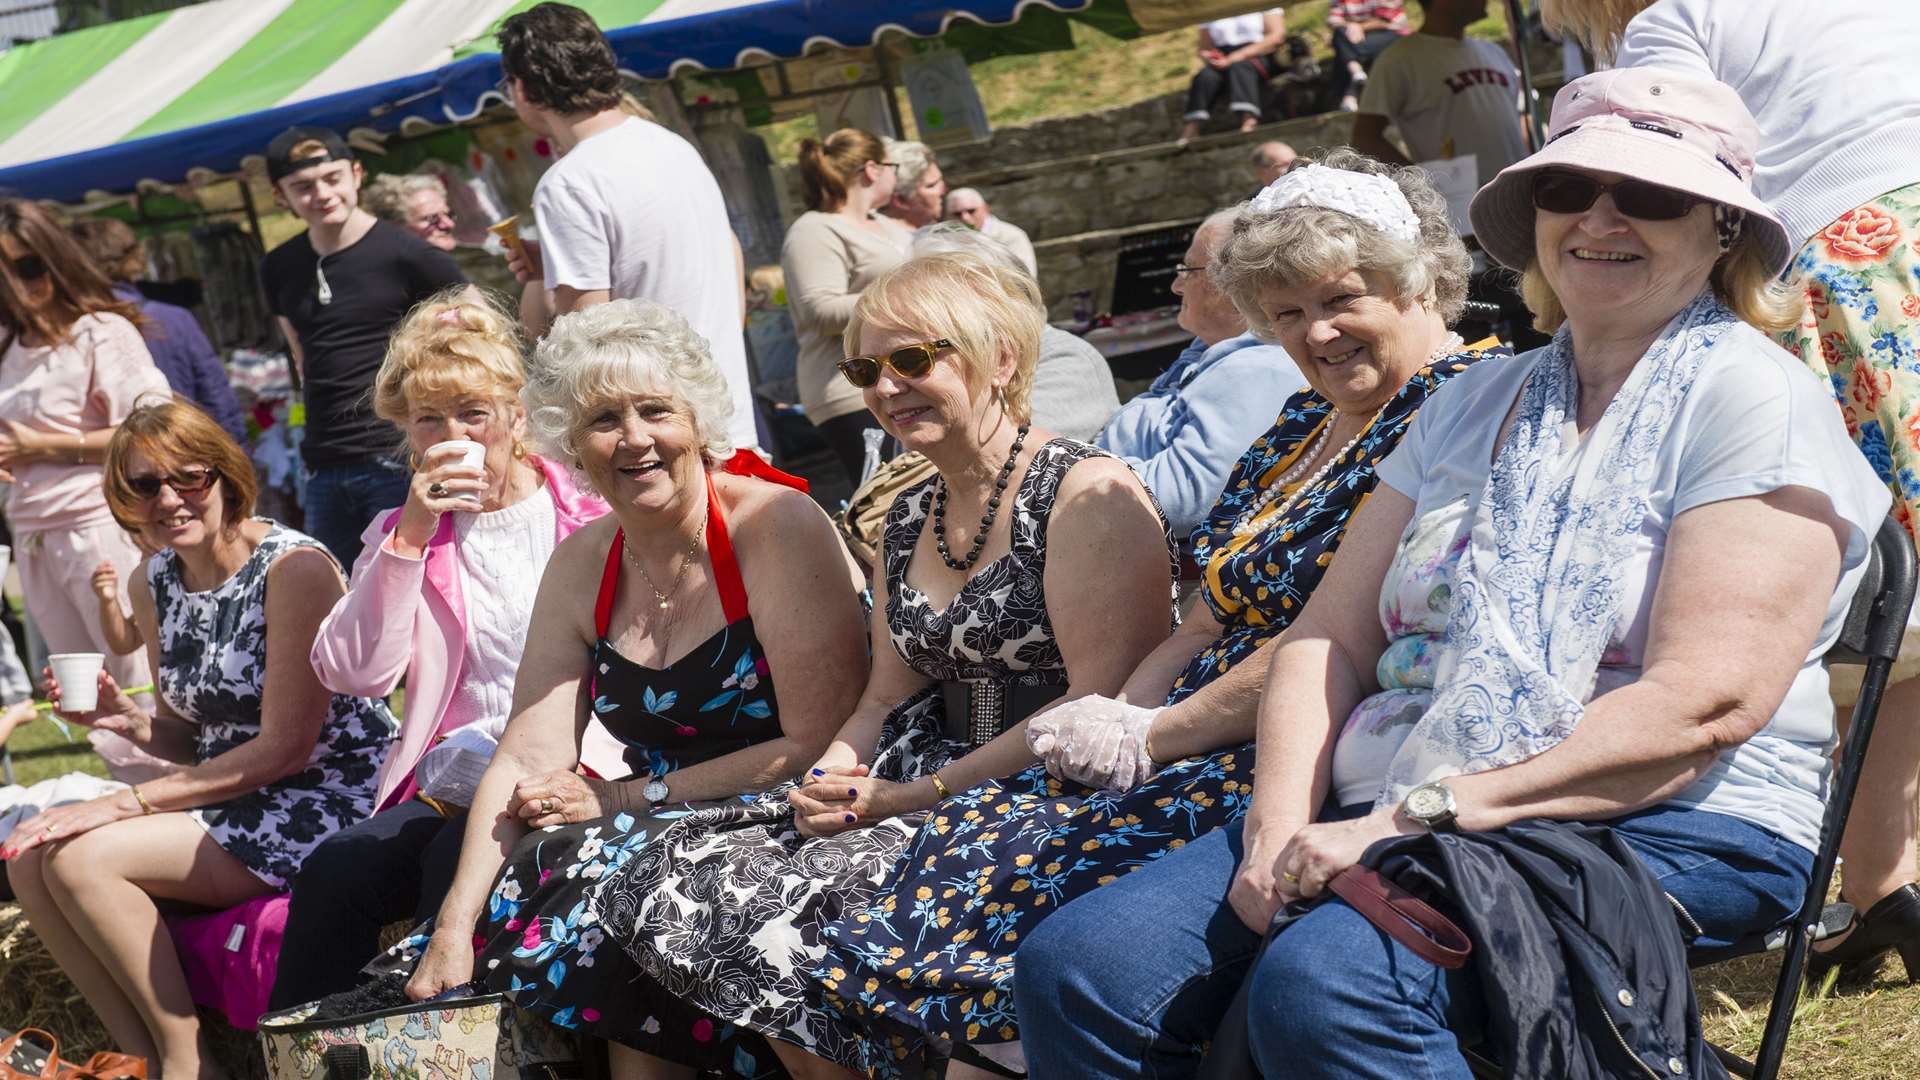 A group of ladies enjoy watching the bands play at the Summer Fayre on the Square in the Fort Gardens, Gravesend